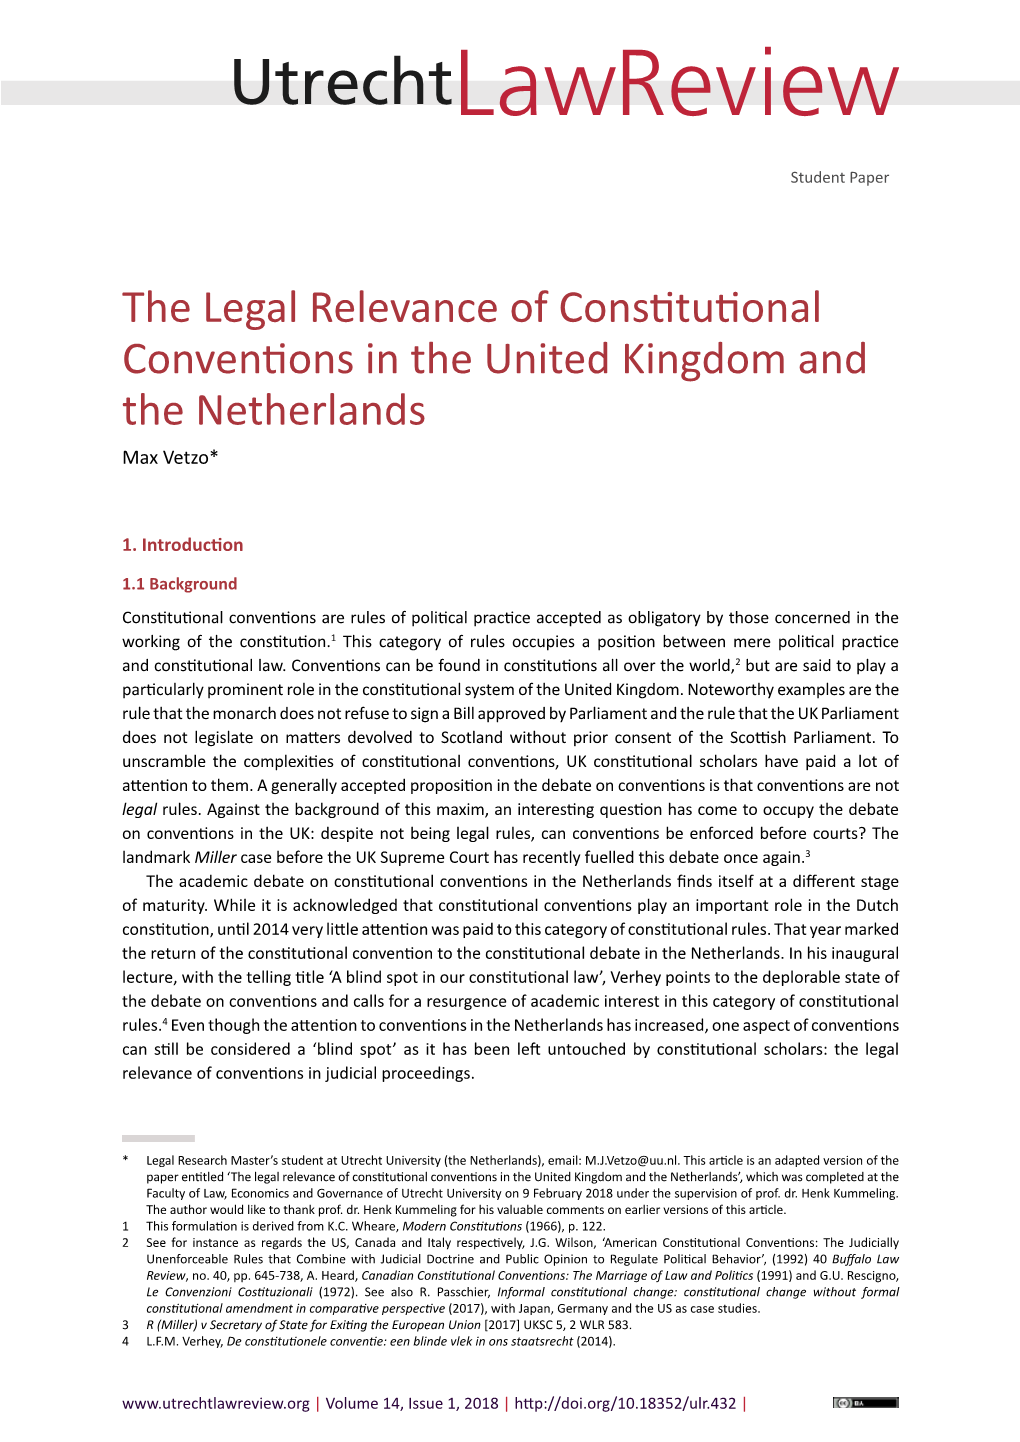 The Legal Relevance of Constitutional Conventions in the United Kingdom and the Netherlands Max Vetzo*